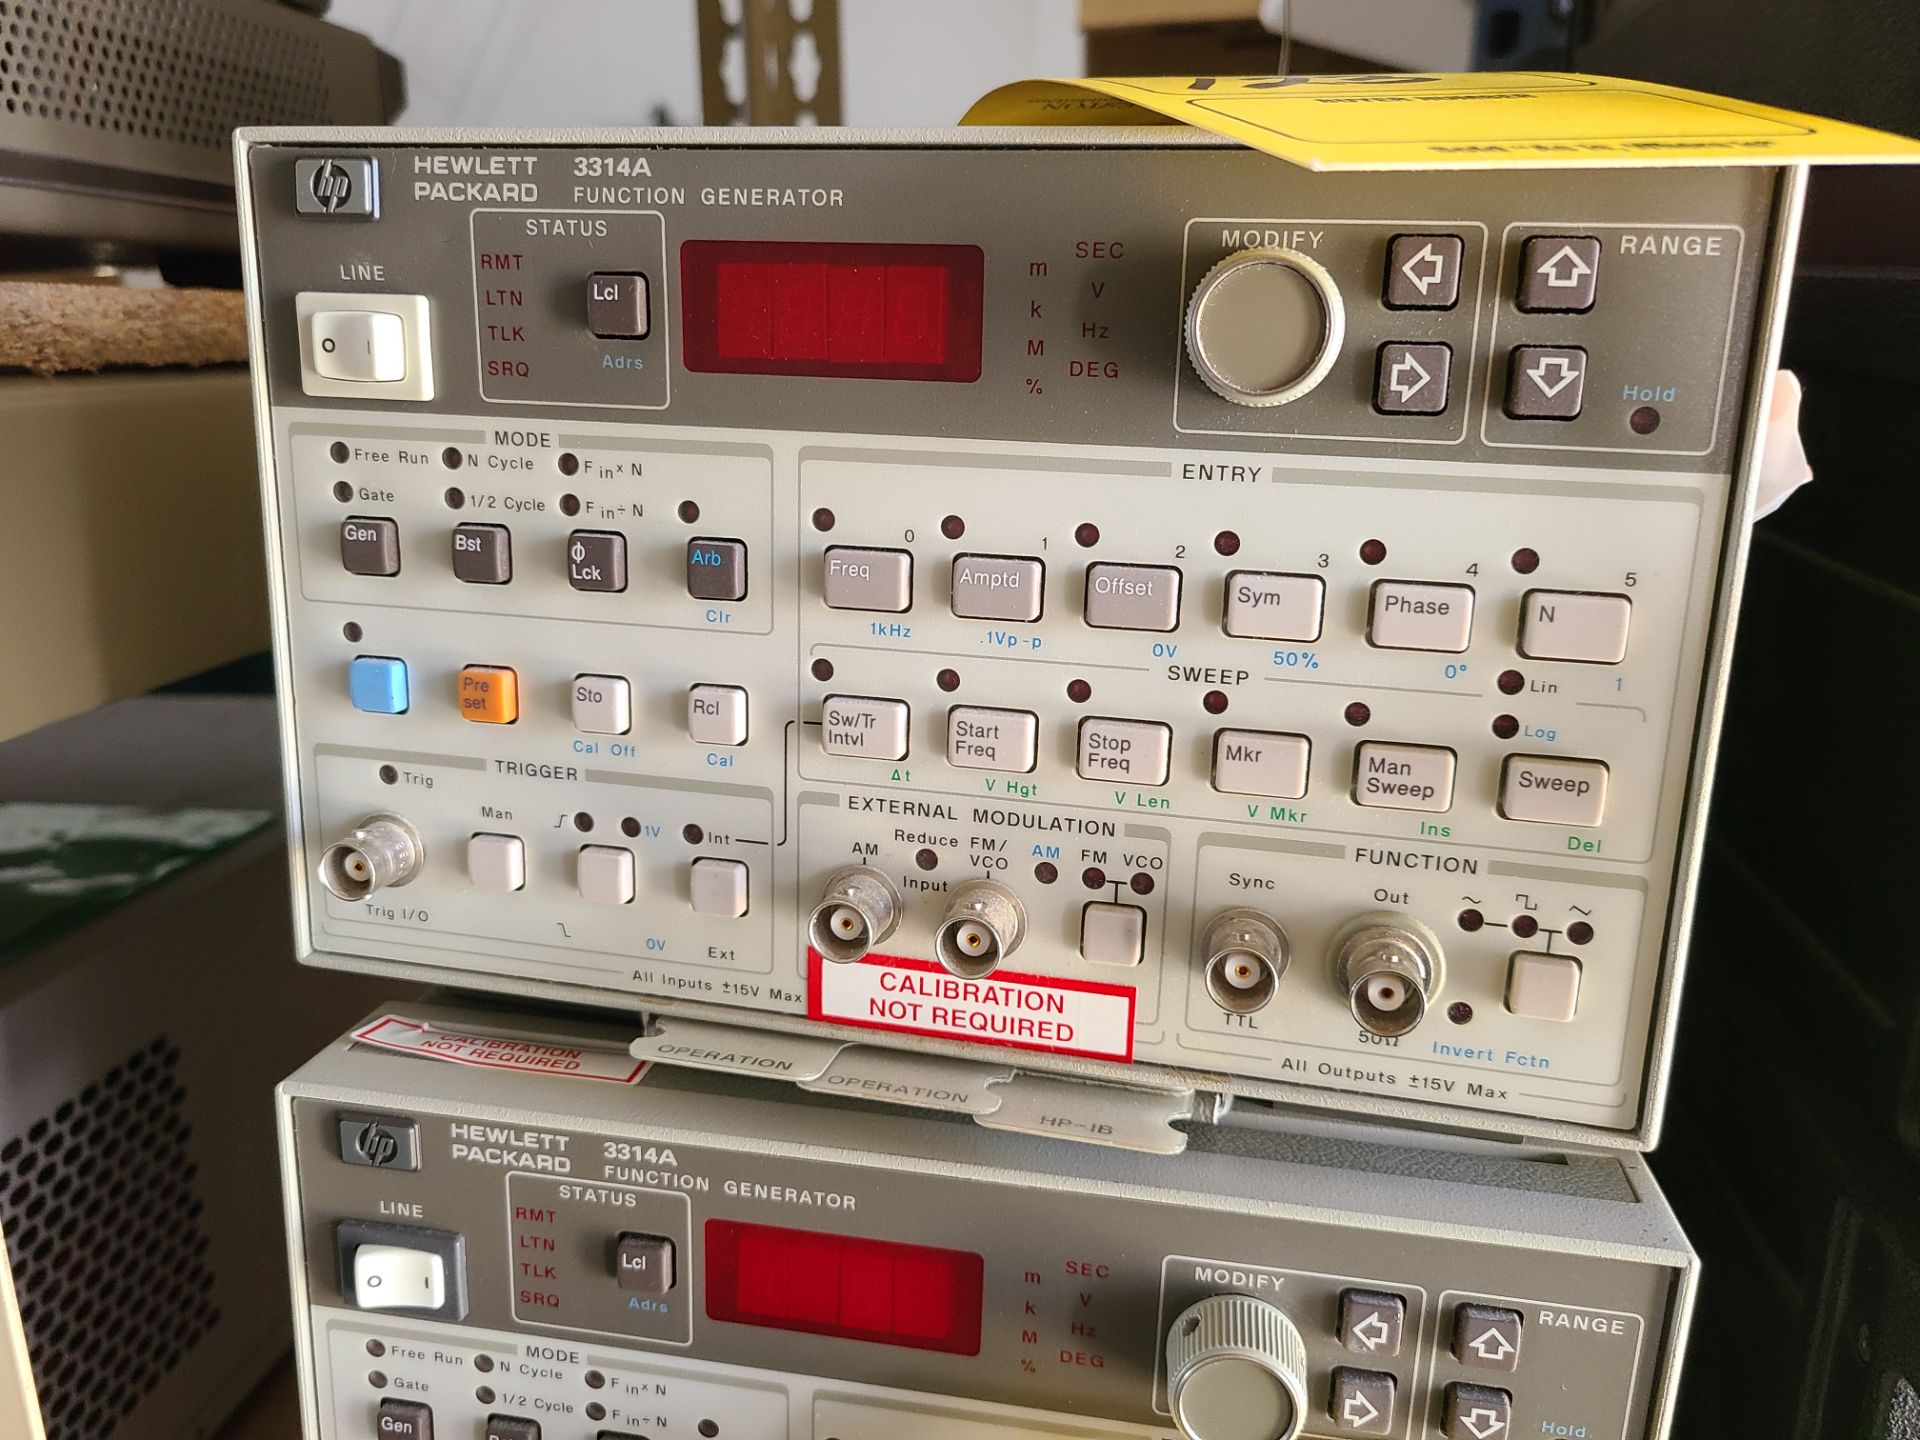 HP 3314A FUNCTION GENERATOR